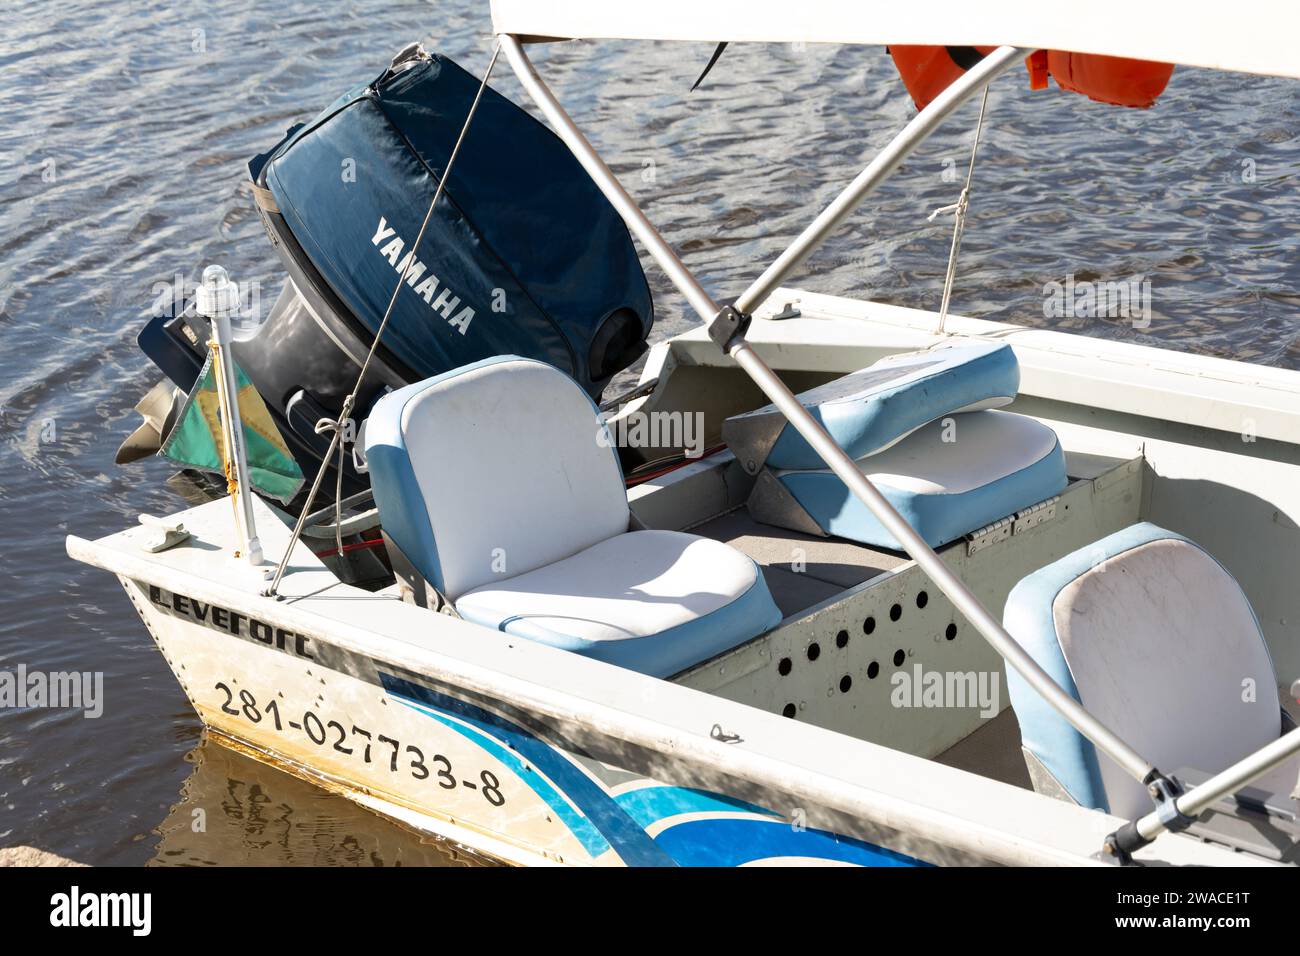 Aratuipe, Bahia, Brazil - May 30, 2015: A pleasure boat with a Yamaha engine stopped on the Jaguaripe river in Maragogipinho, a district of the city o Stock Photo